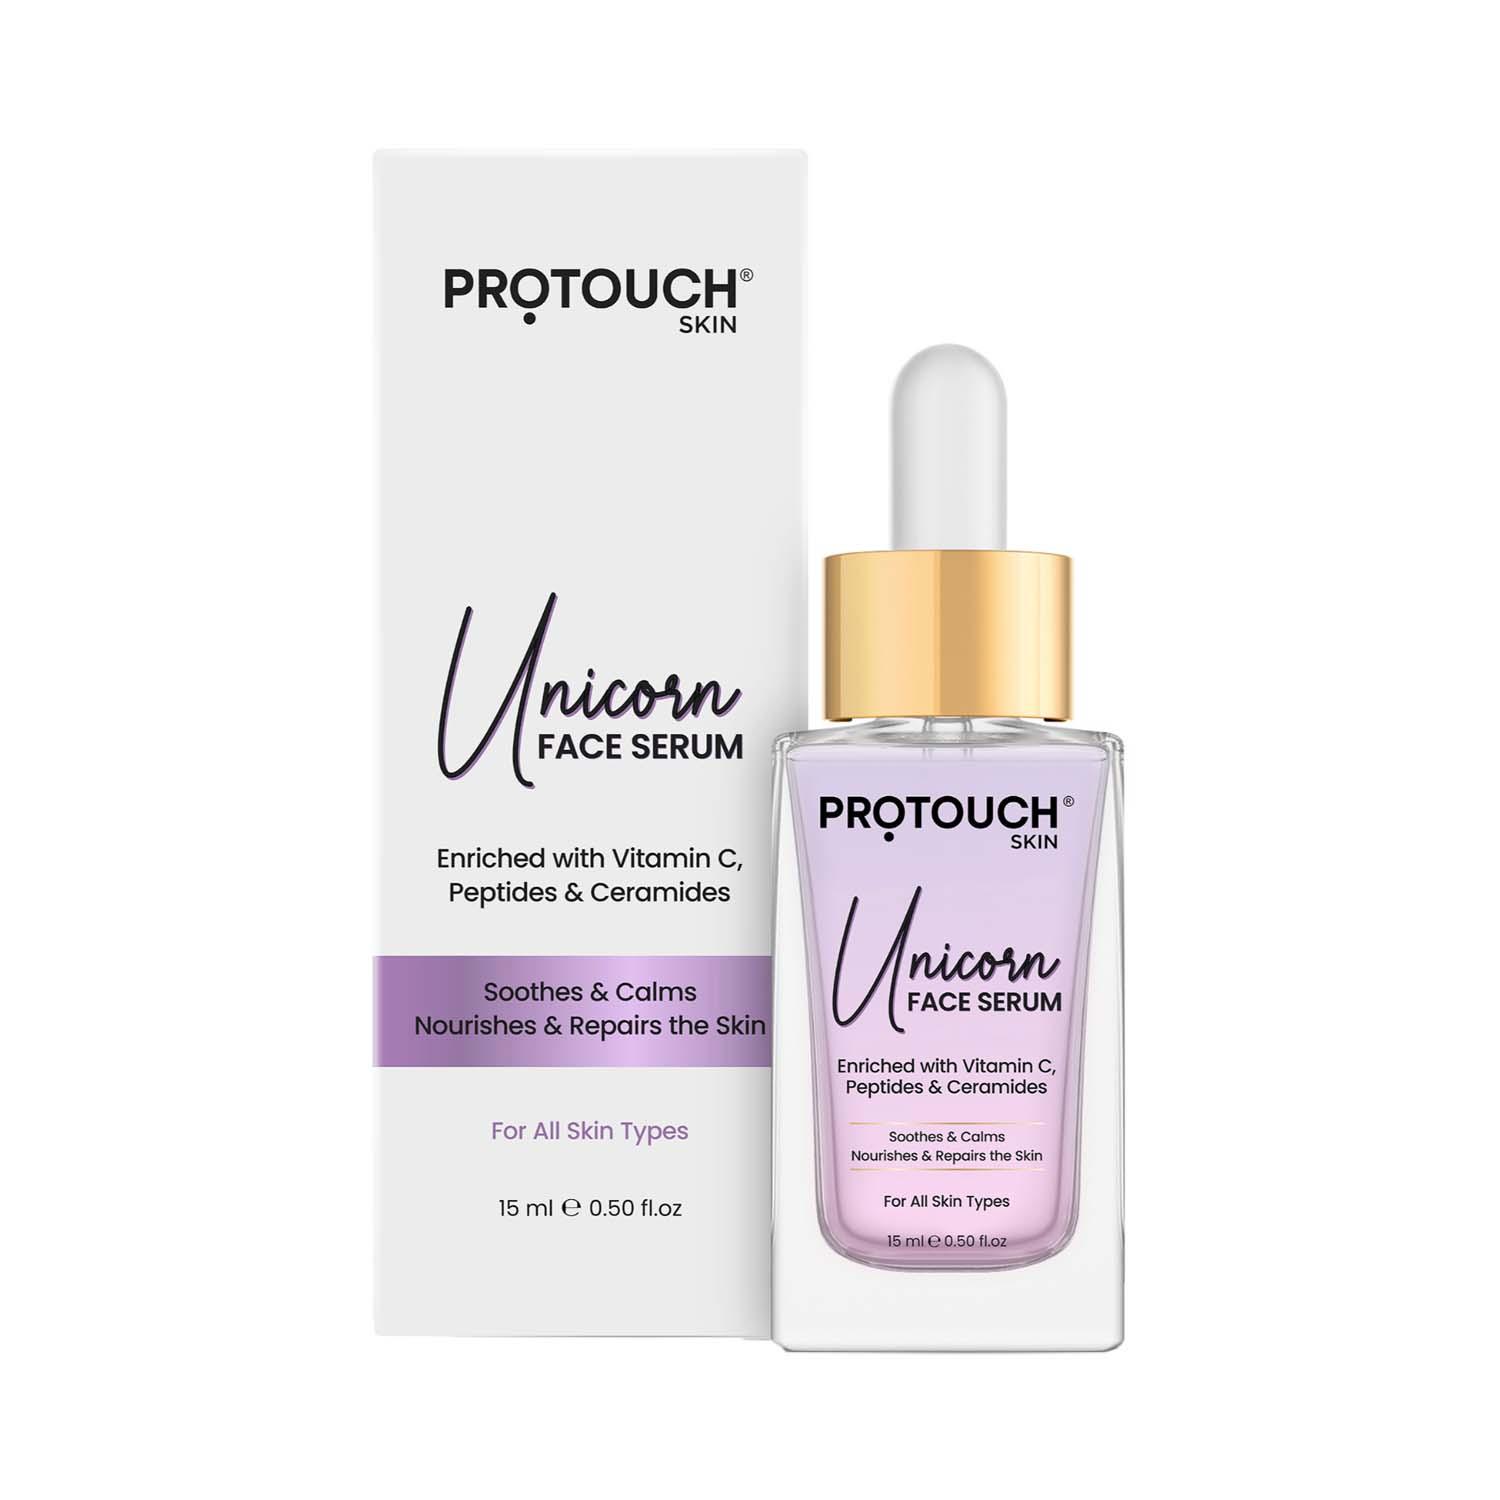 Protouch | Protouch Unicorn Face Serum with Vitamin C, Niacinamide & Ceramides